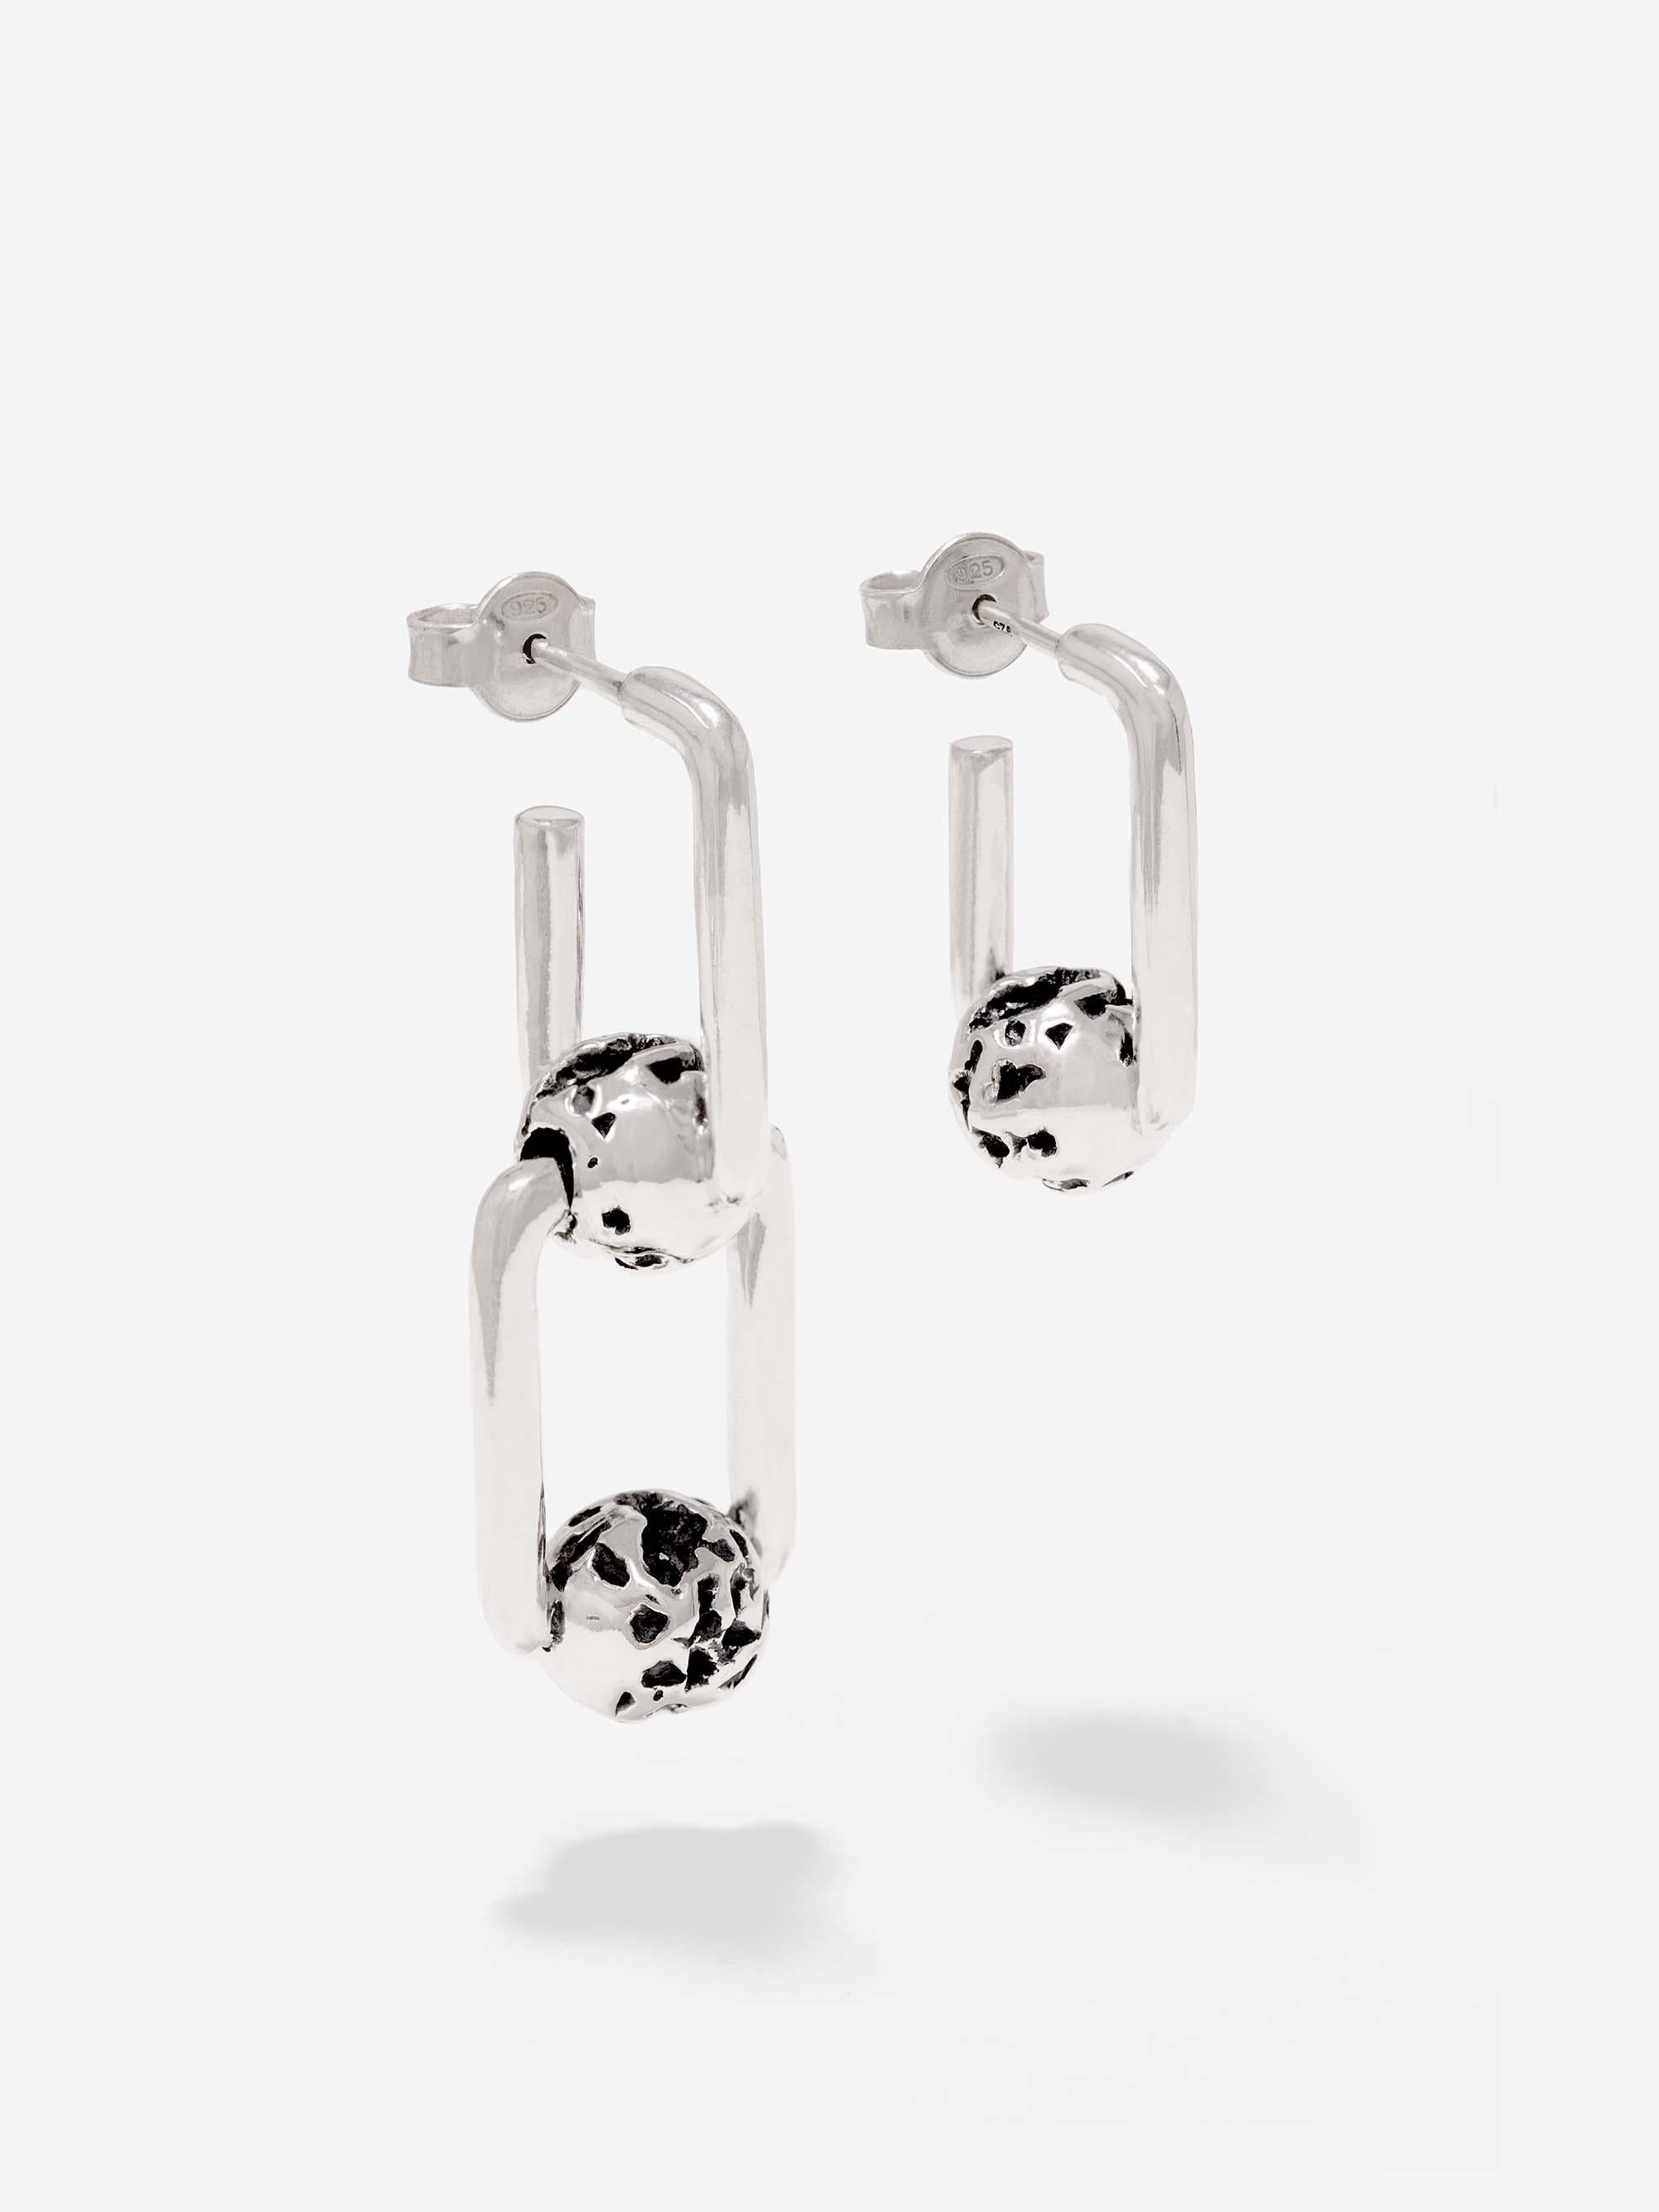 CAPTIVE - Made of solid sterling silver, the Novae Asymmetrical earrings make a solid statement when worn on opposite lobes or doubled up onto one.

The double chain link earring weighs 8g and the single chain earring weighs 4g. This gives a total